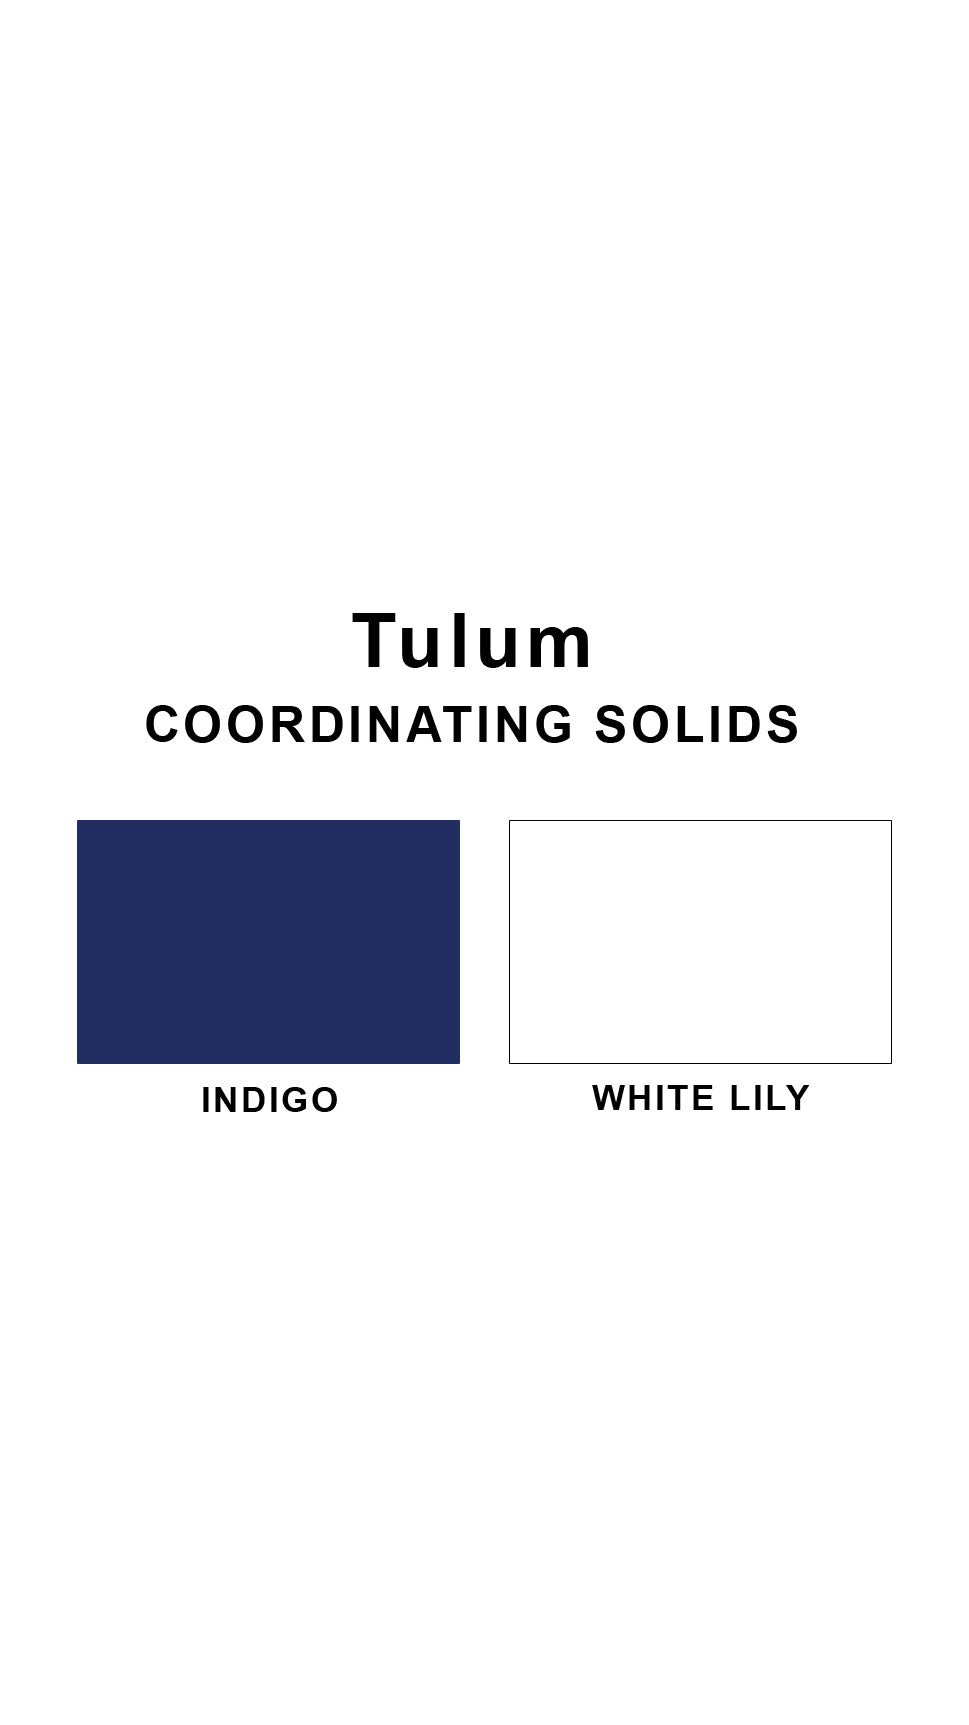 Coordinating solids chart for Tulum swimsuit print: Indigo and White Lily